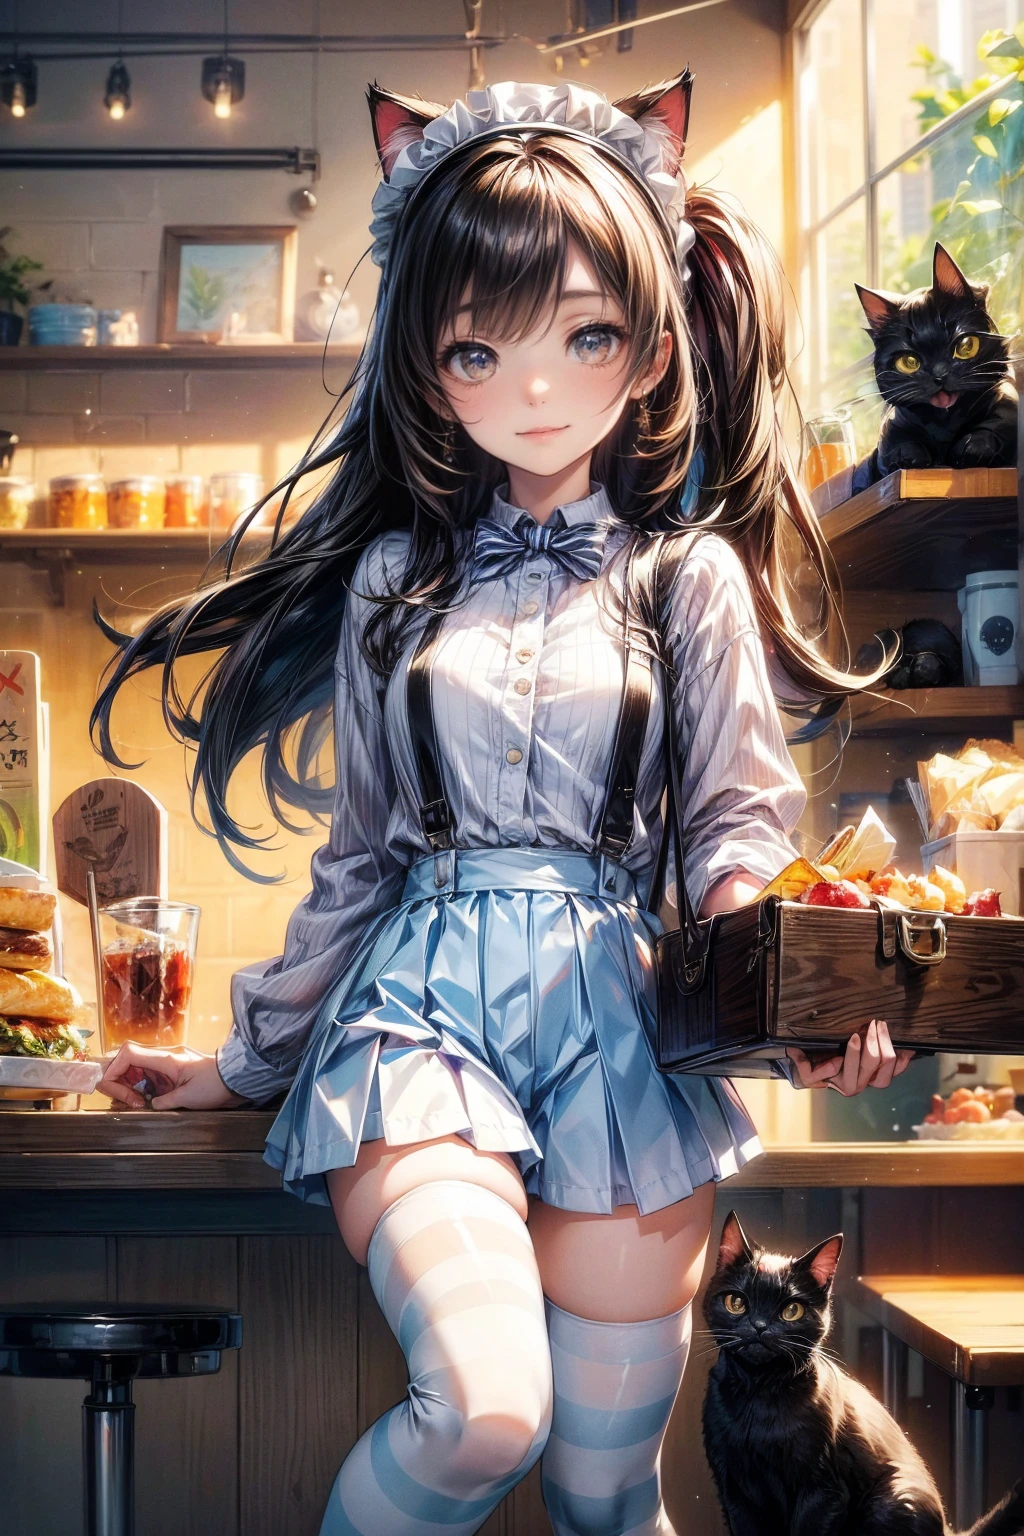 One Girl、(20-year-old woman)、Cat ears headband、Cat tail、Detailed maid、Holding a tray with two parfaits on it in one hand、With the other hand, lift your skirt to show your underwear、Short skirt、I can see your pants、White knee-high socks、(Striped pants:1.3)、Highest quality、8K、Beautiful Face、Mischievous smile、Wink to the viewer、View Viewer、A bright cafe with a black cat